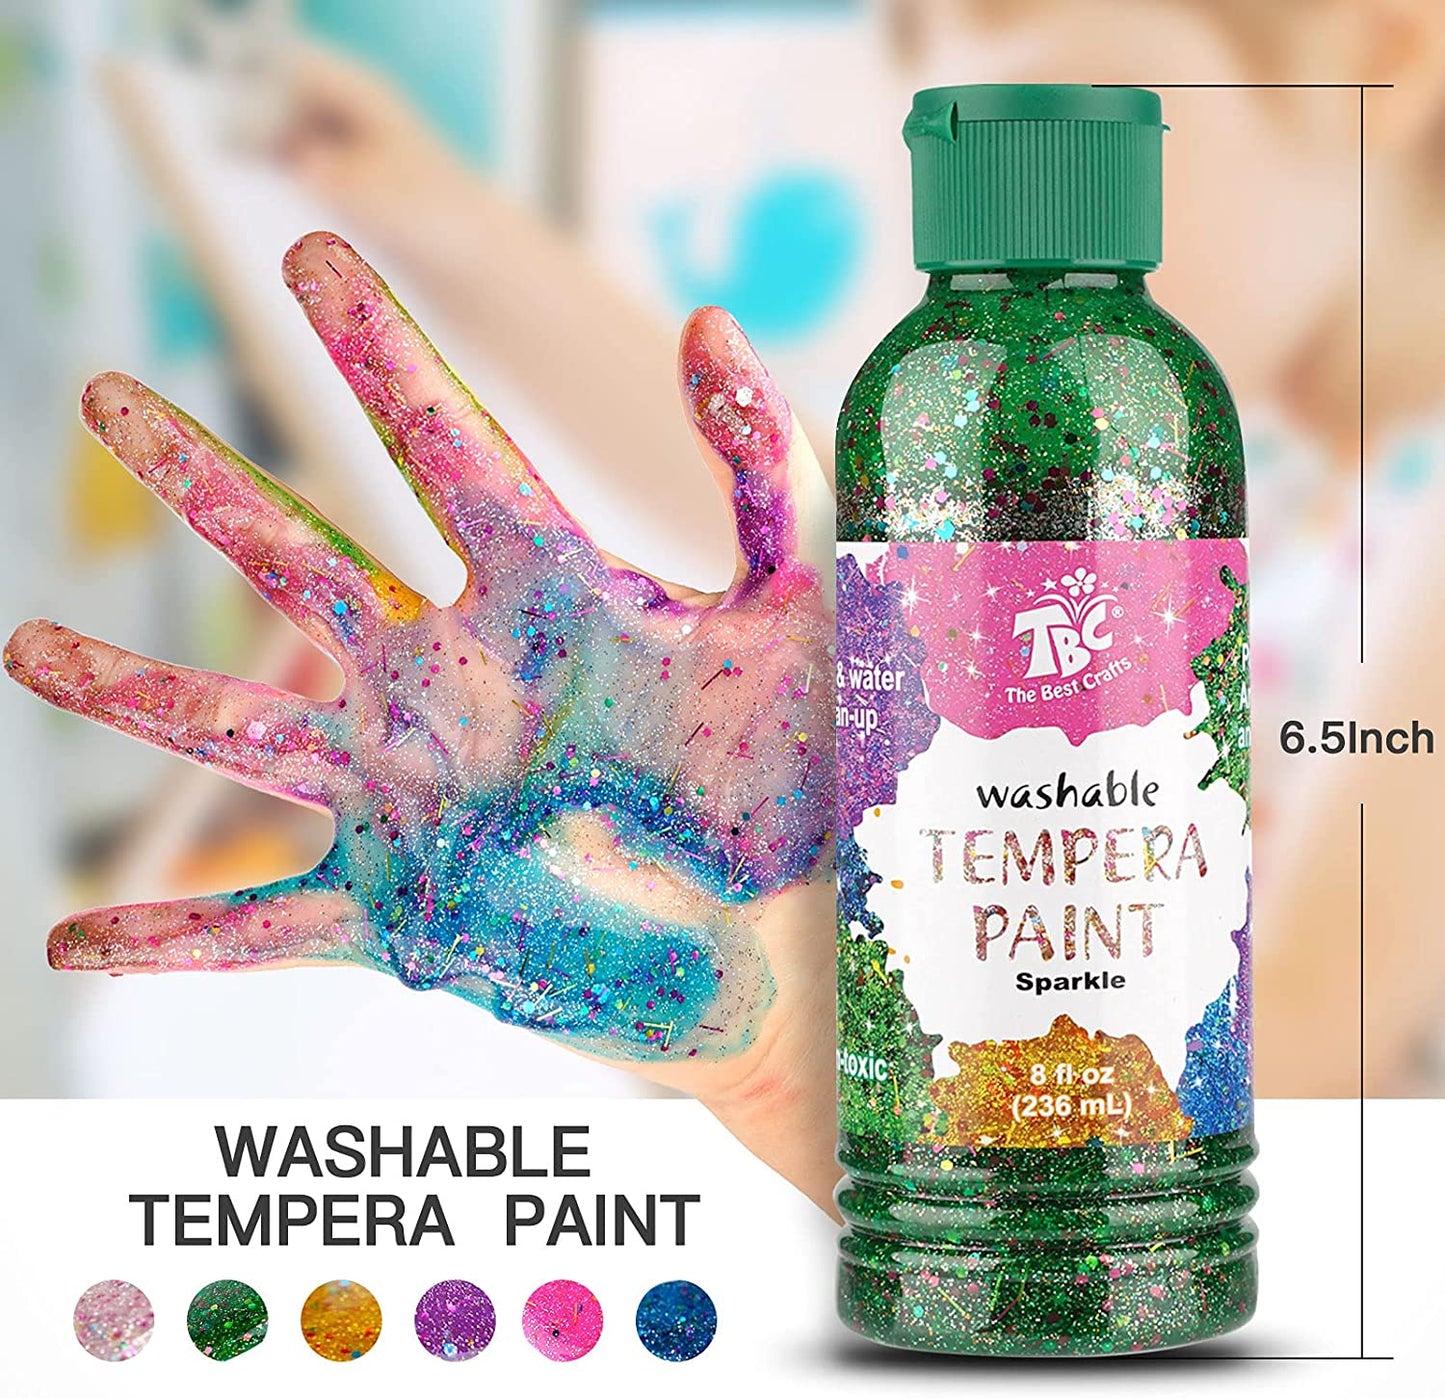 The length of the TBC washable sparkle Tempera paint is 6.5 inches - Stationery Island